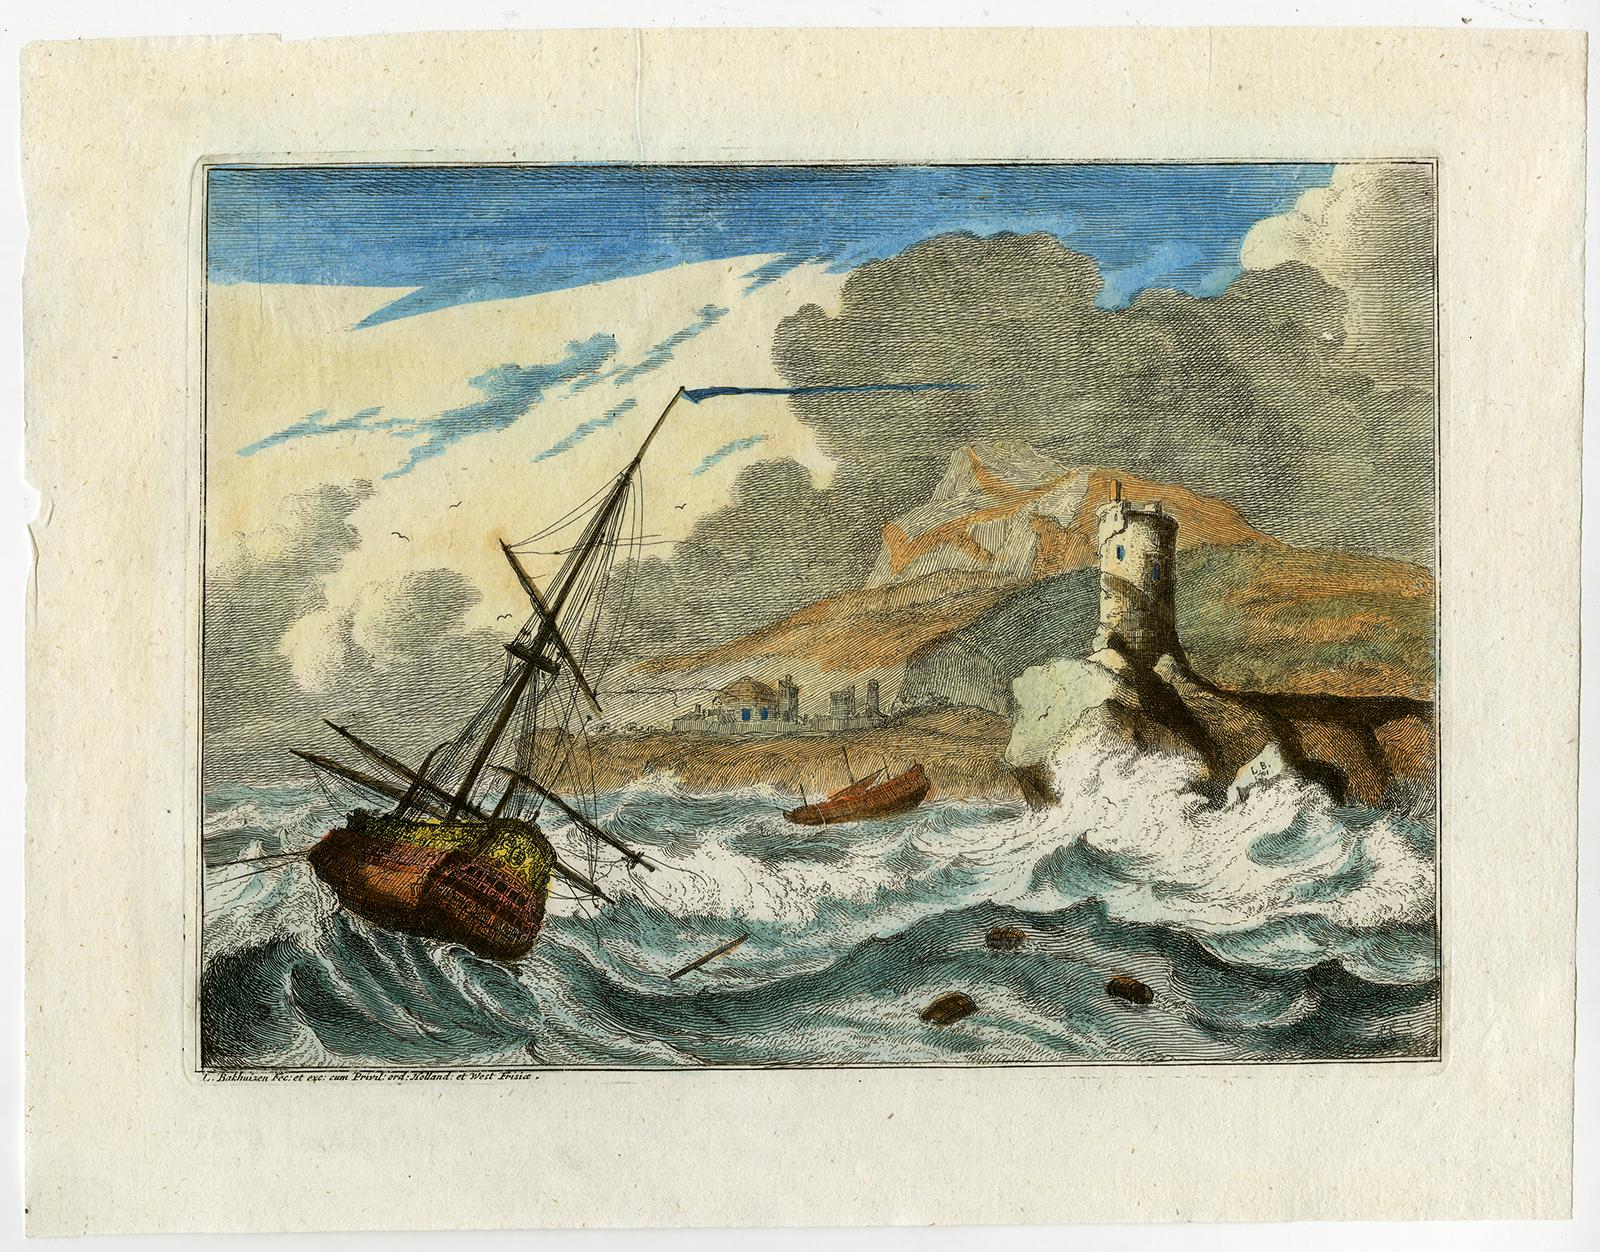 Ludolf Bakhuisen Animal Print - A ship in a storm by Ludolf Bakhuizen - Handcoloured engraving - 18th Century